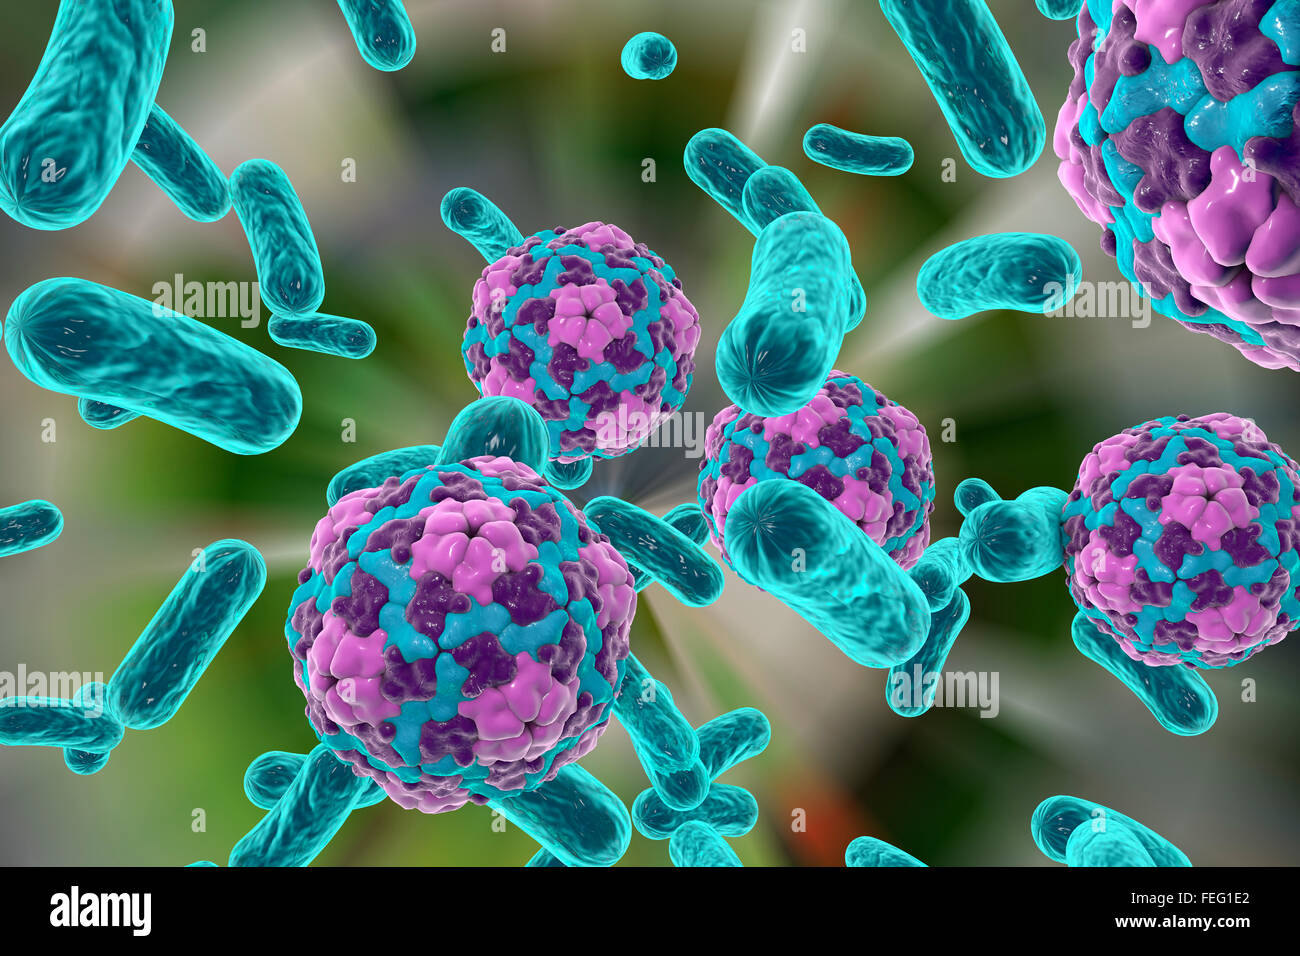 Illustration of bacteria and hepatitis A virus. Many infectious diseases are transmitted by drinking water. This includes Stock Photo